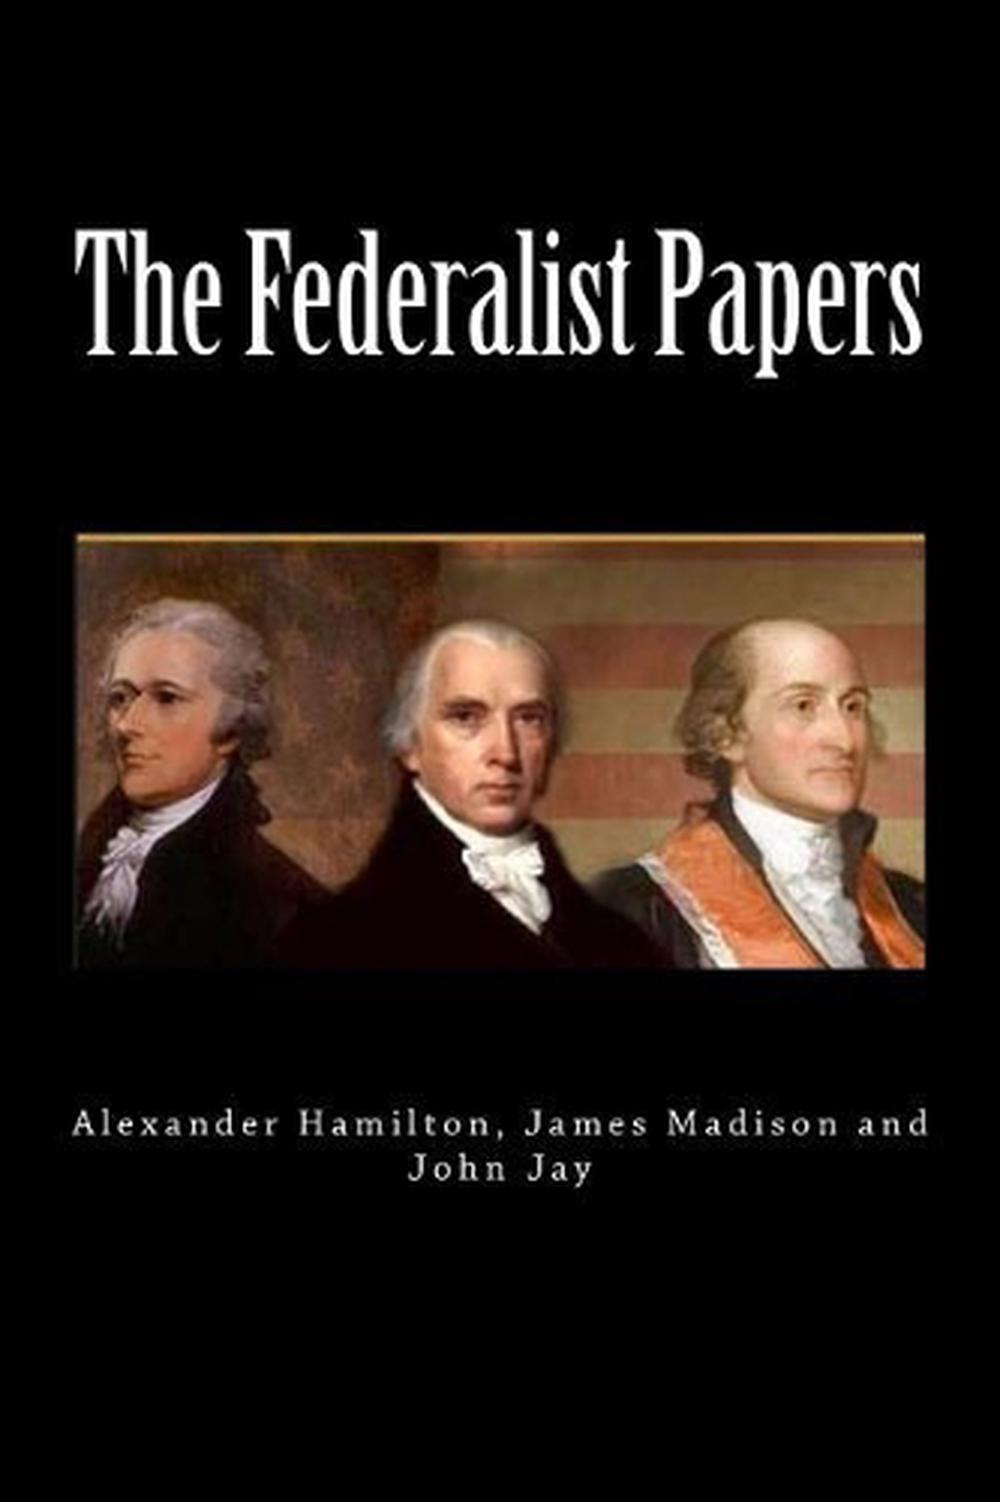 alexander hamilton james madison and john jay the federalist papers